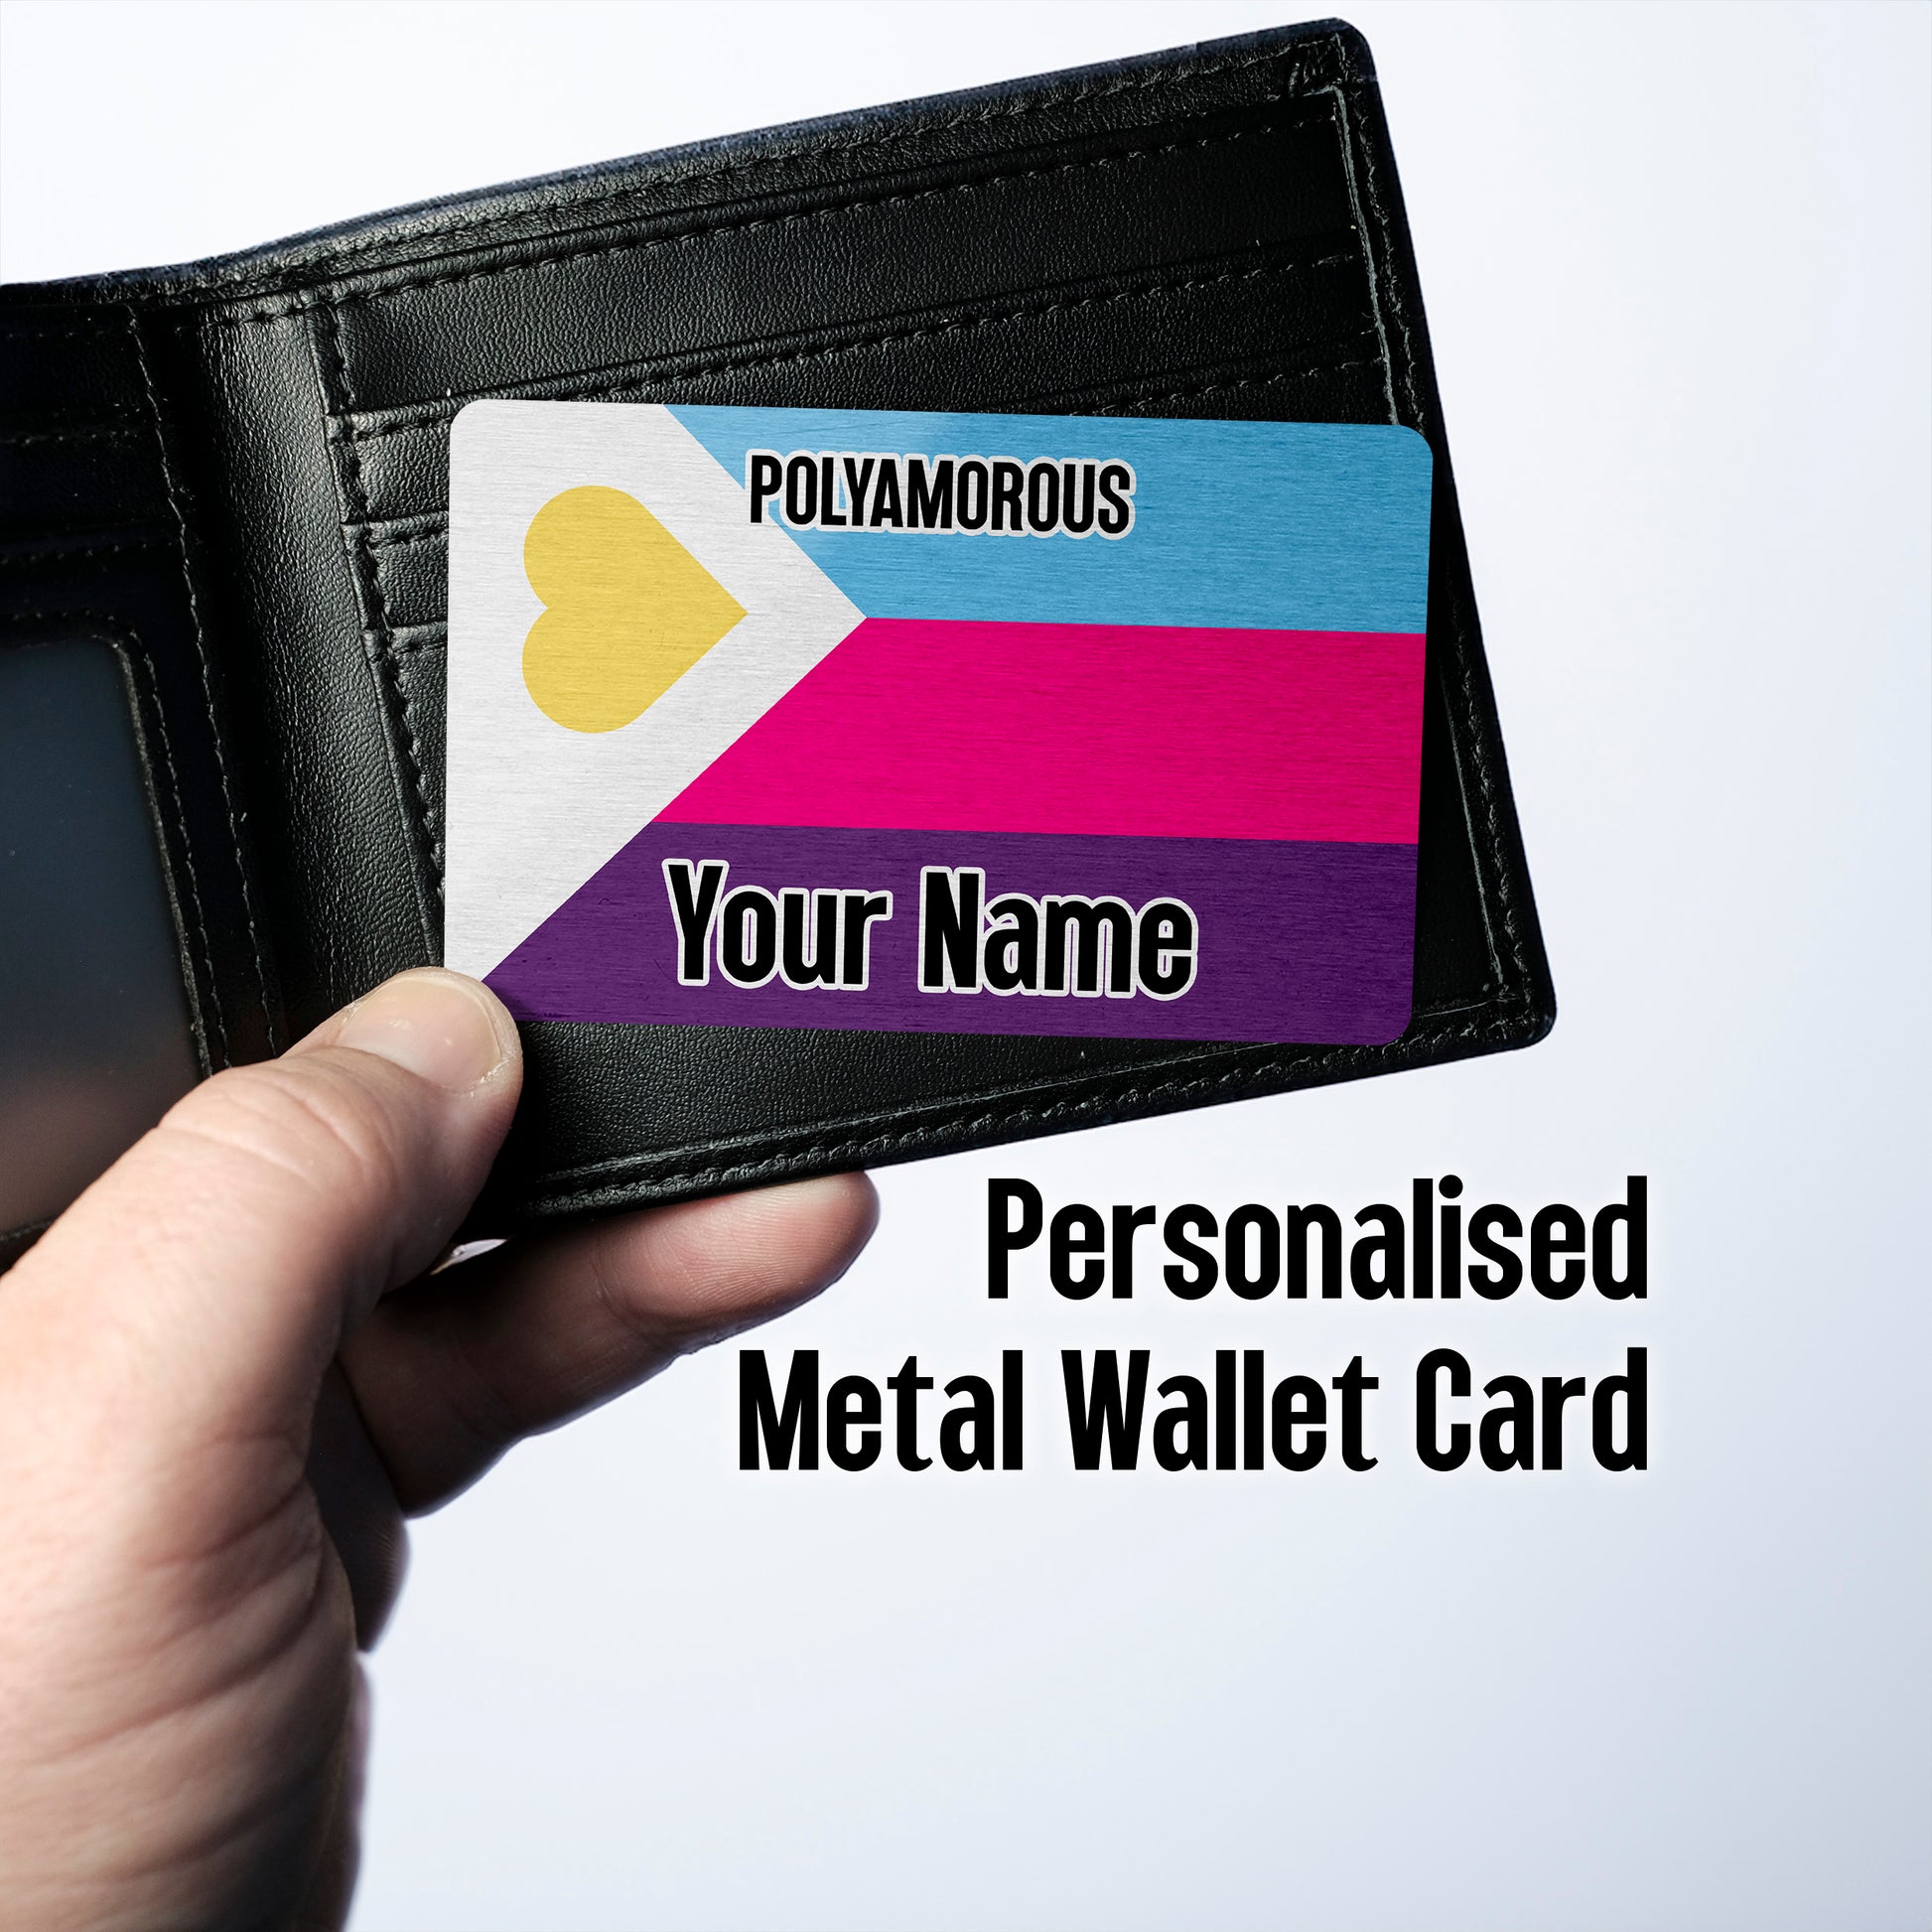 Aluminium wallet card personalised with your name and the new polyamorous pride flag tricolour version